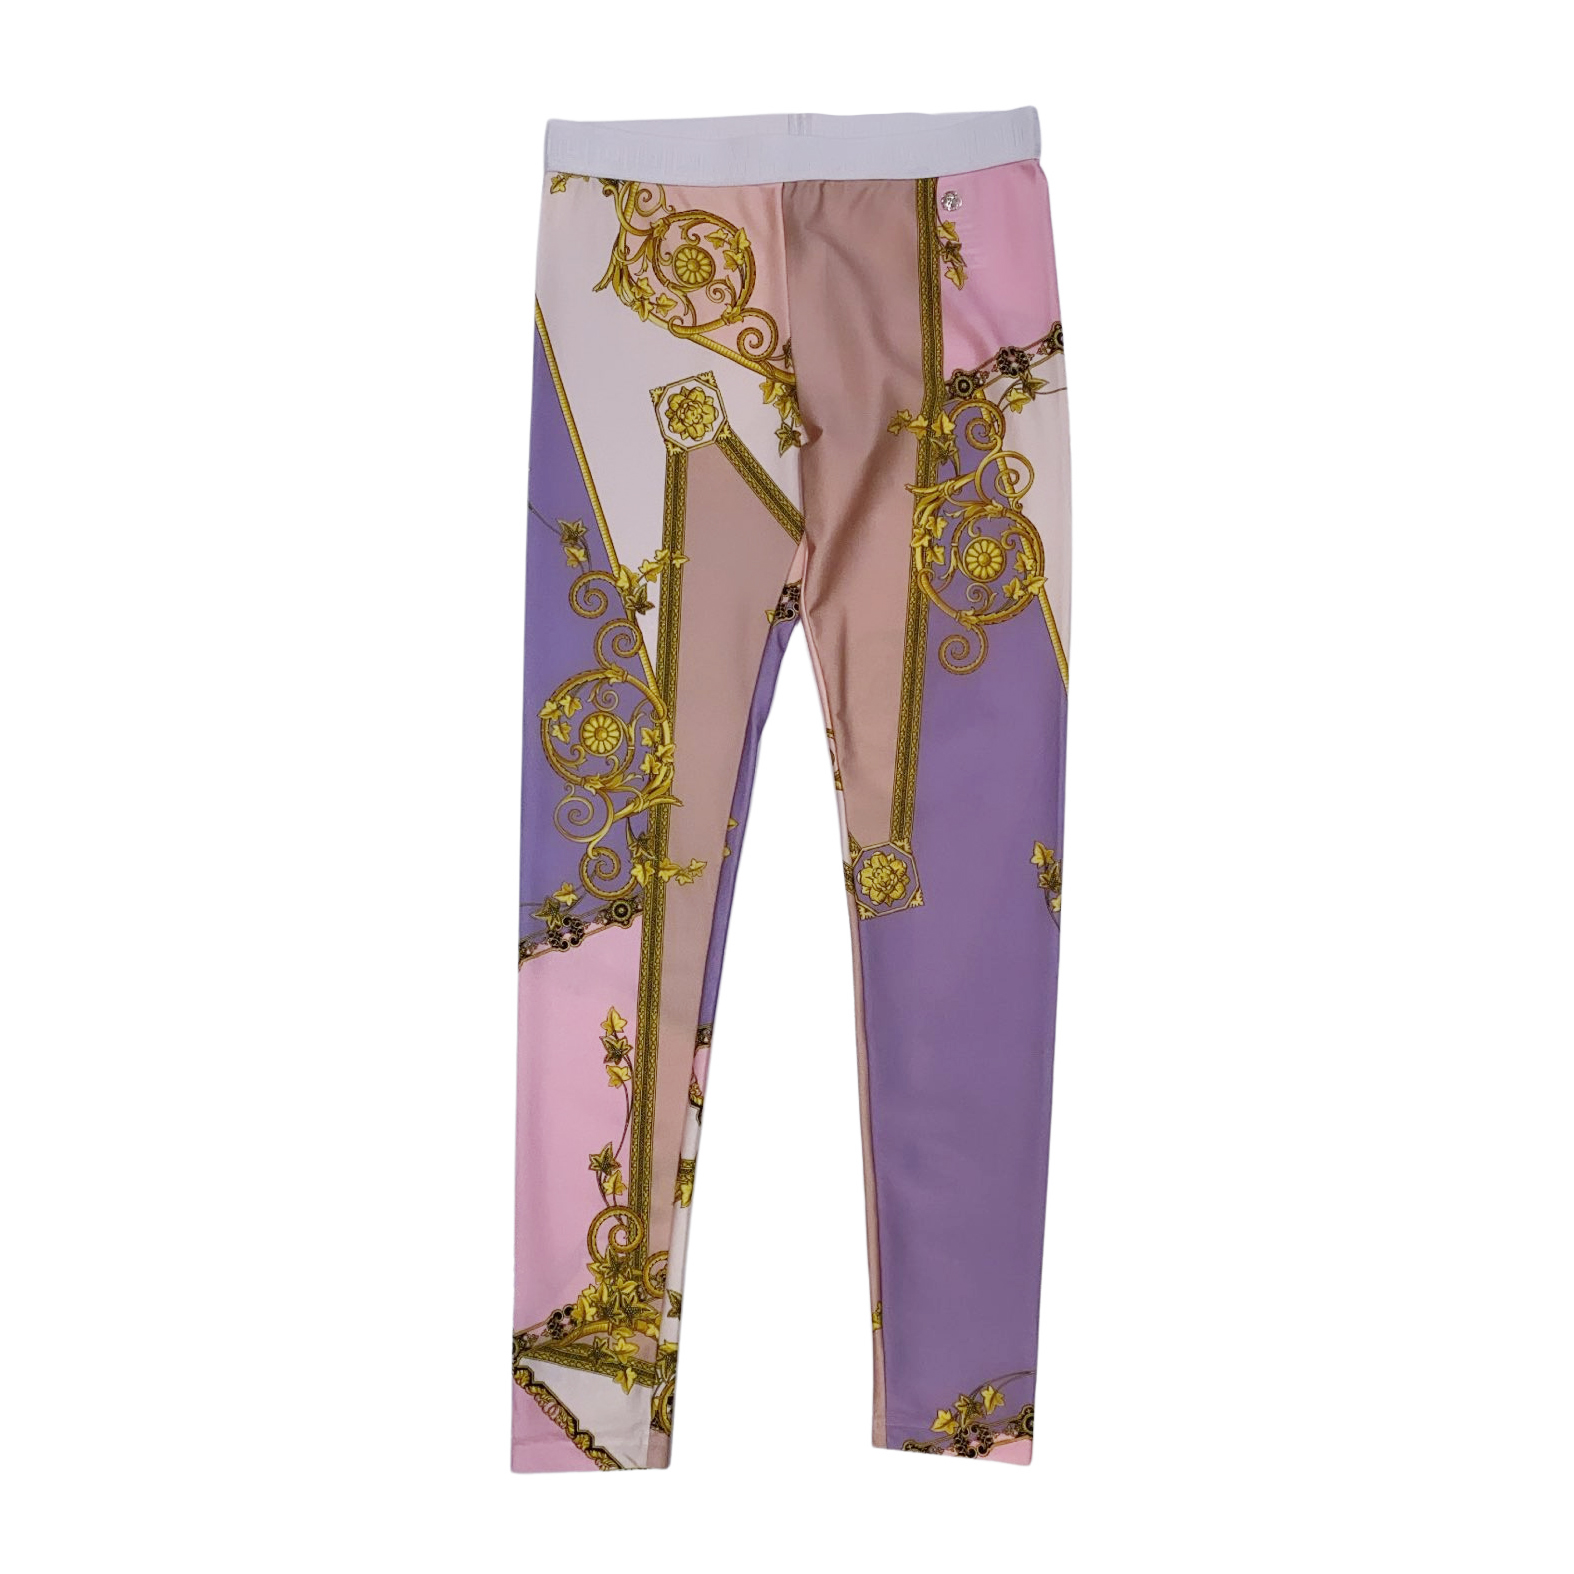 VERSACE COLLECTION LEGGINGS – lestyle